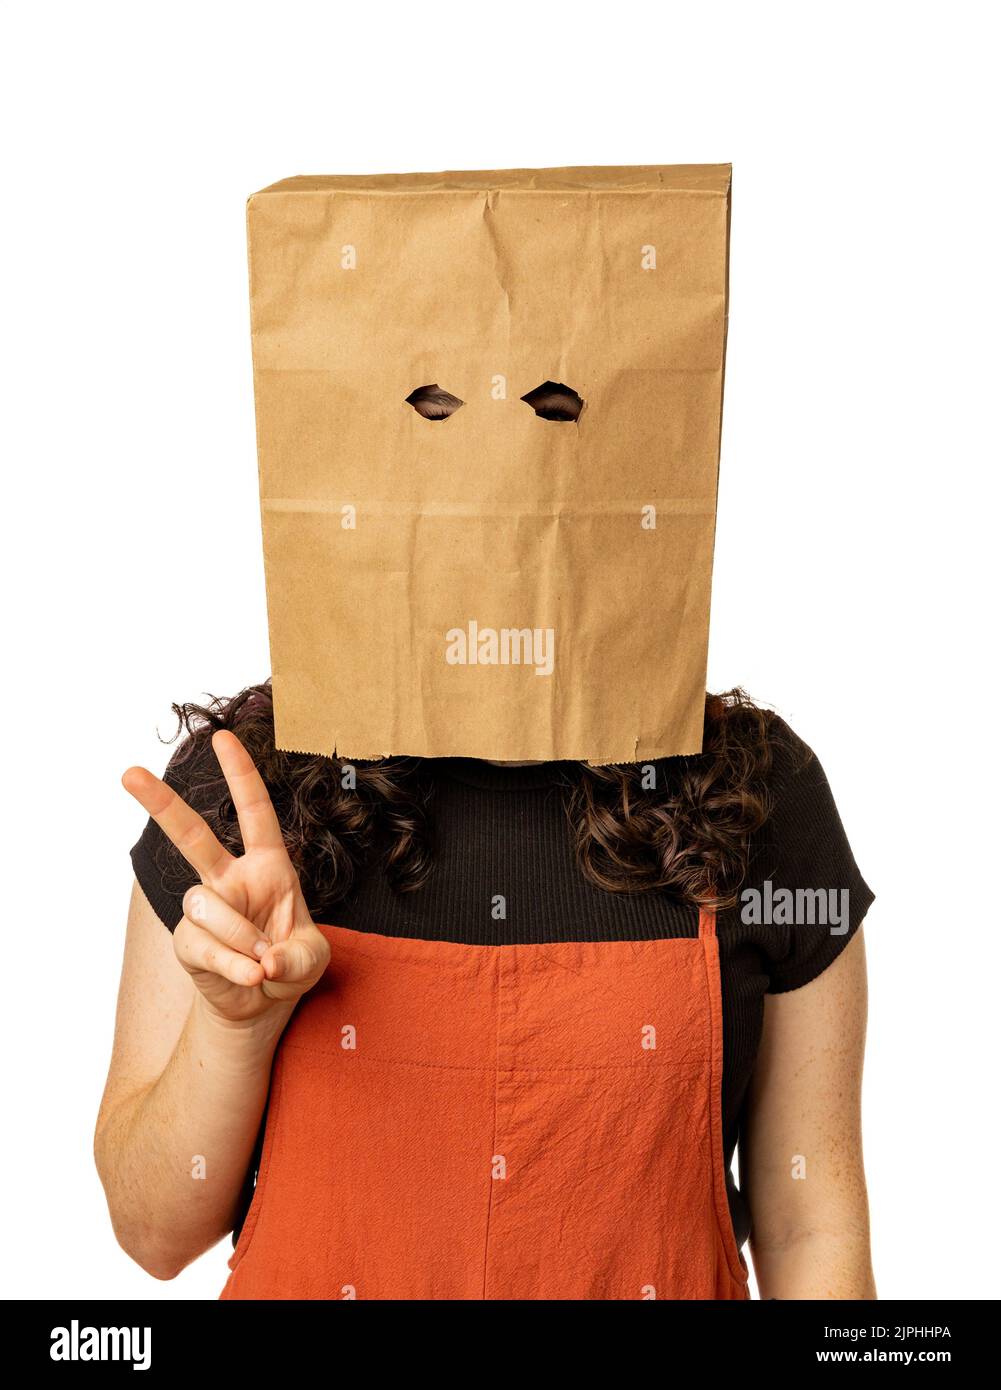 Woman wearing paper bag over her head and giving the peace sign Stock Photo